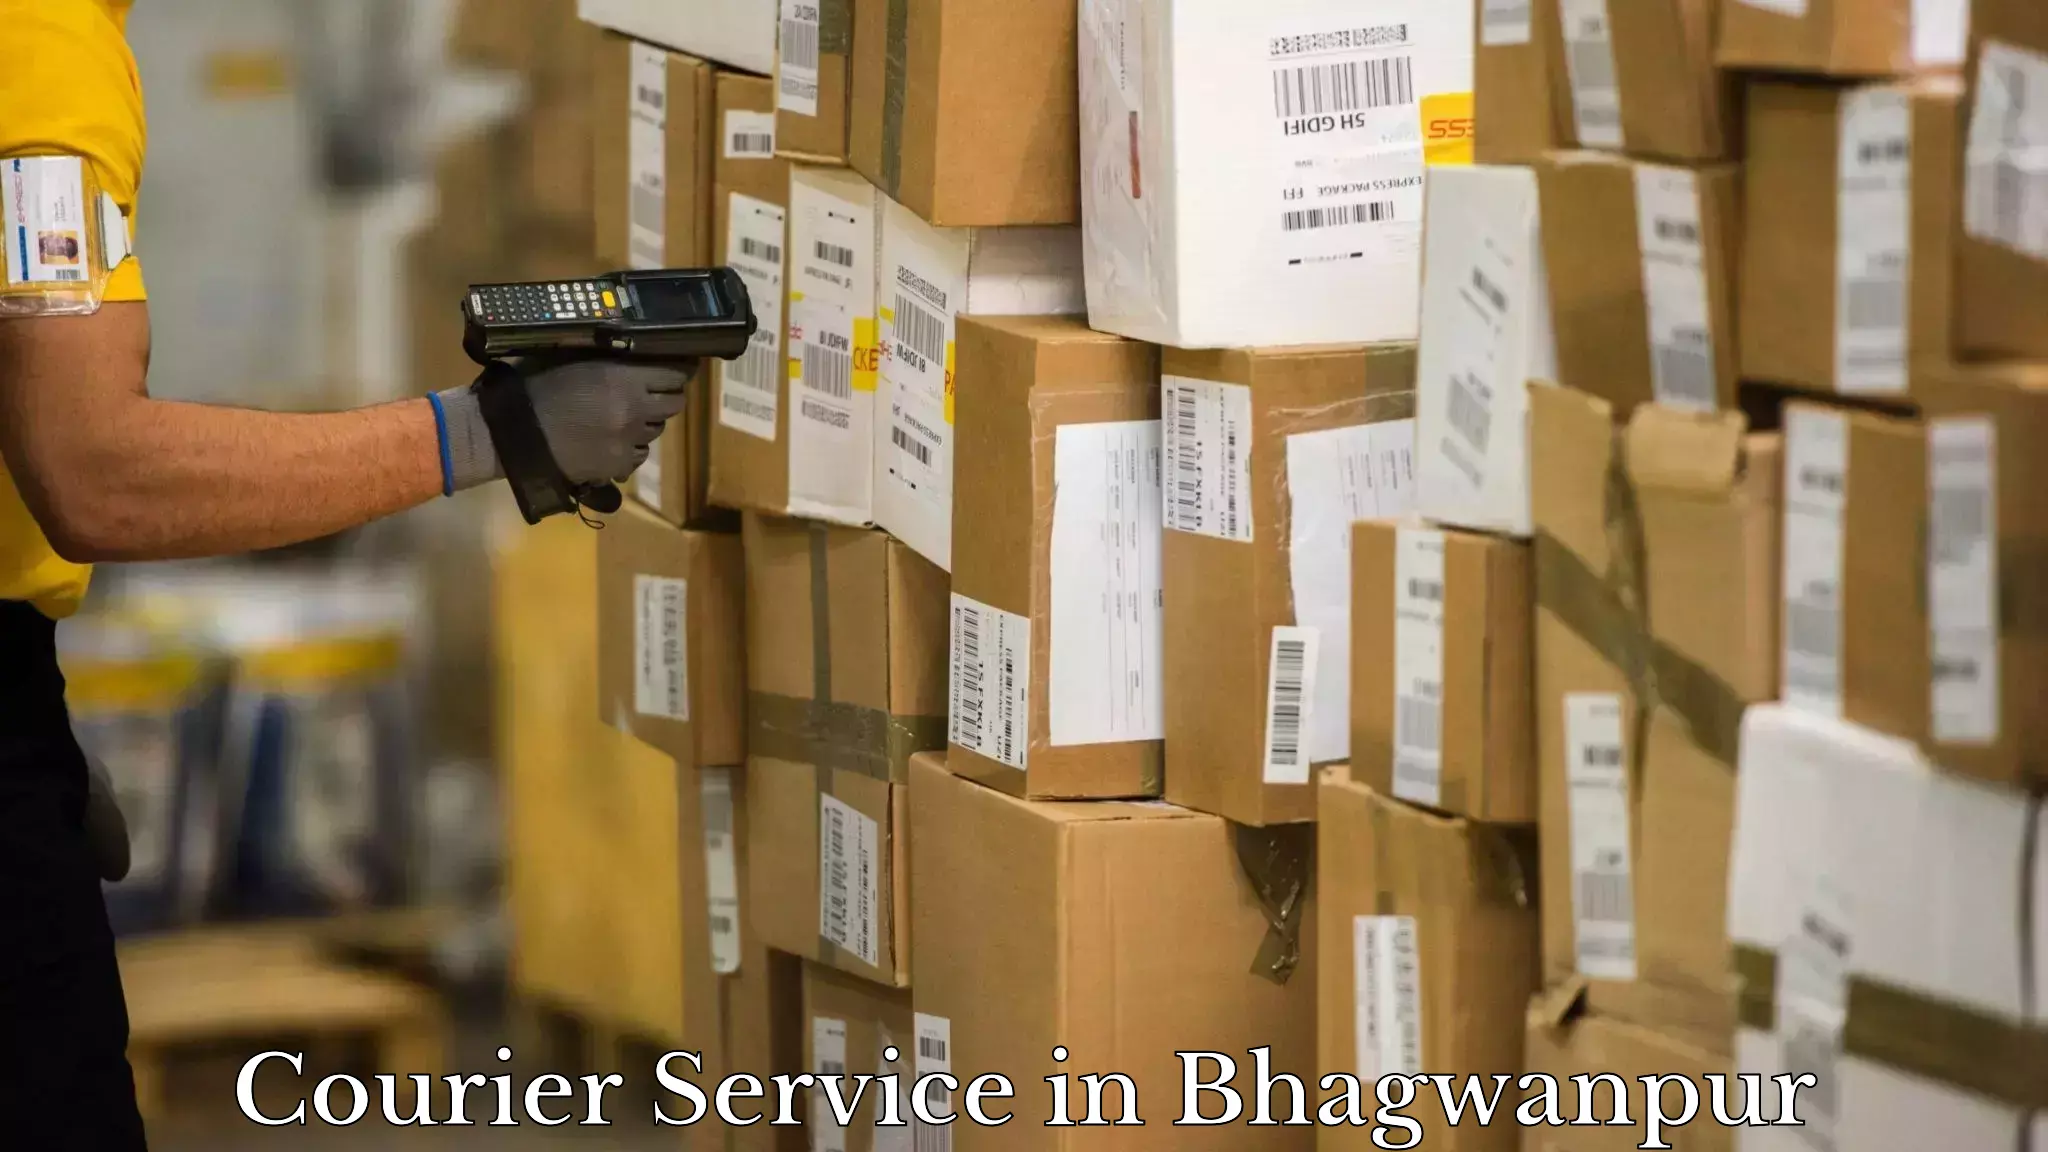 Premium delivery services in Bhagwanpur